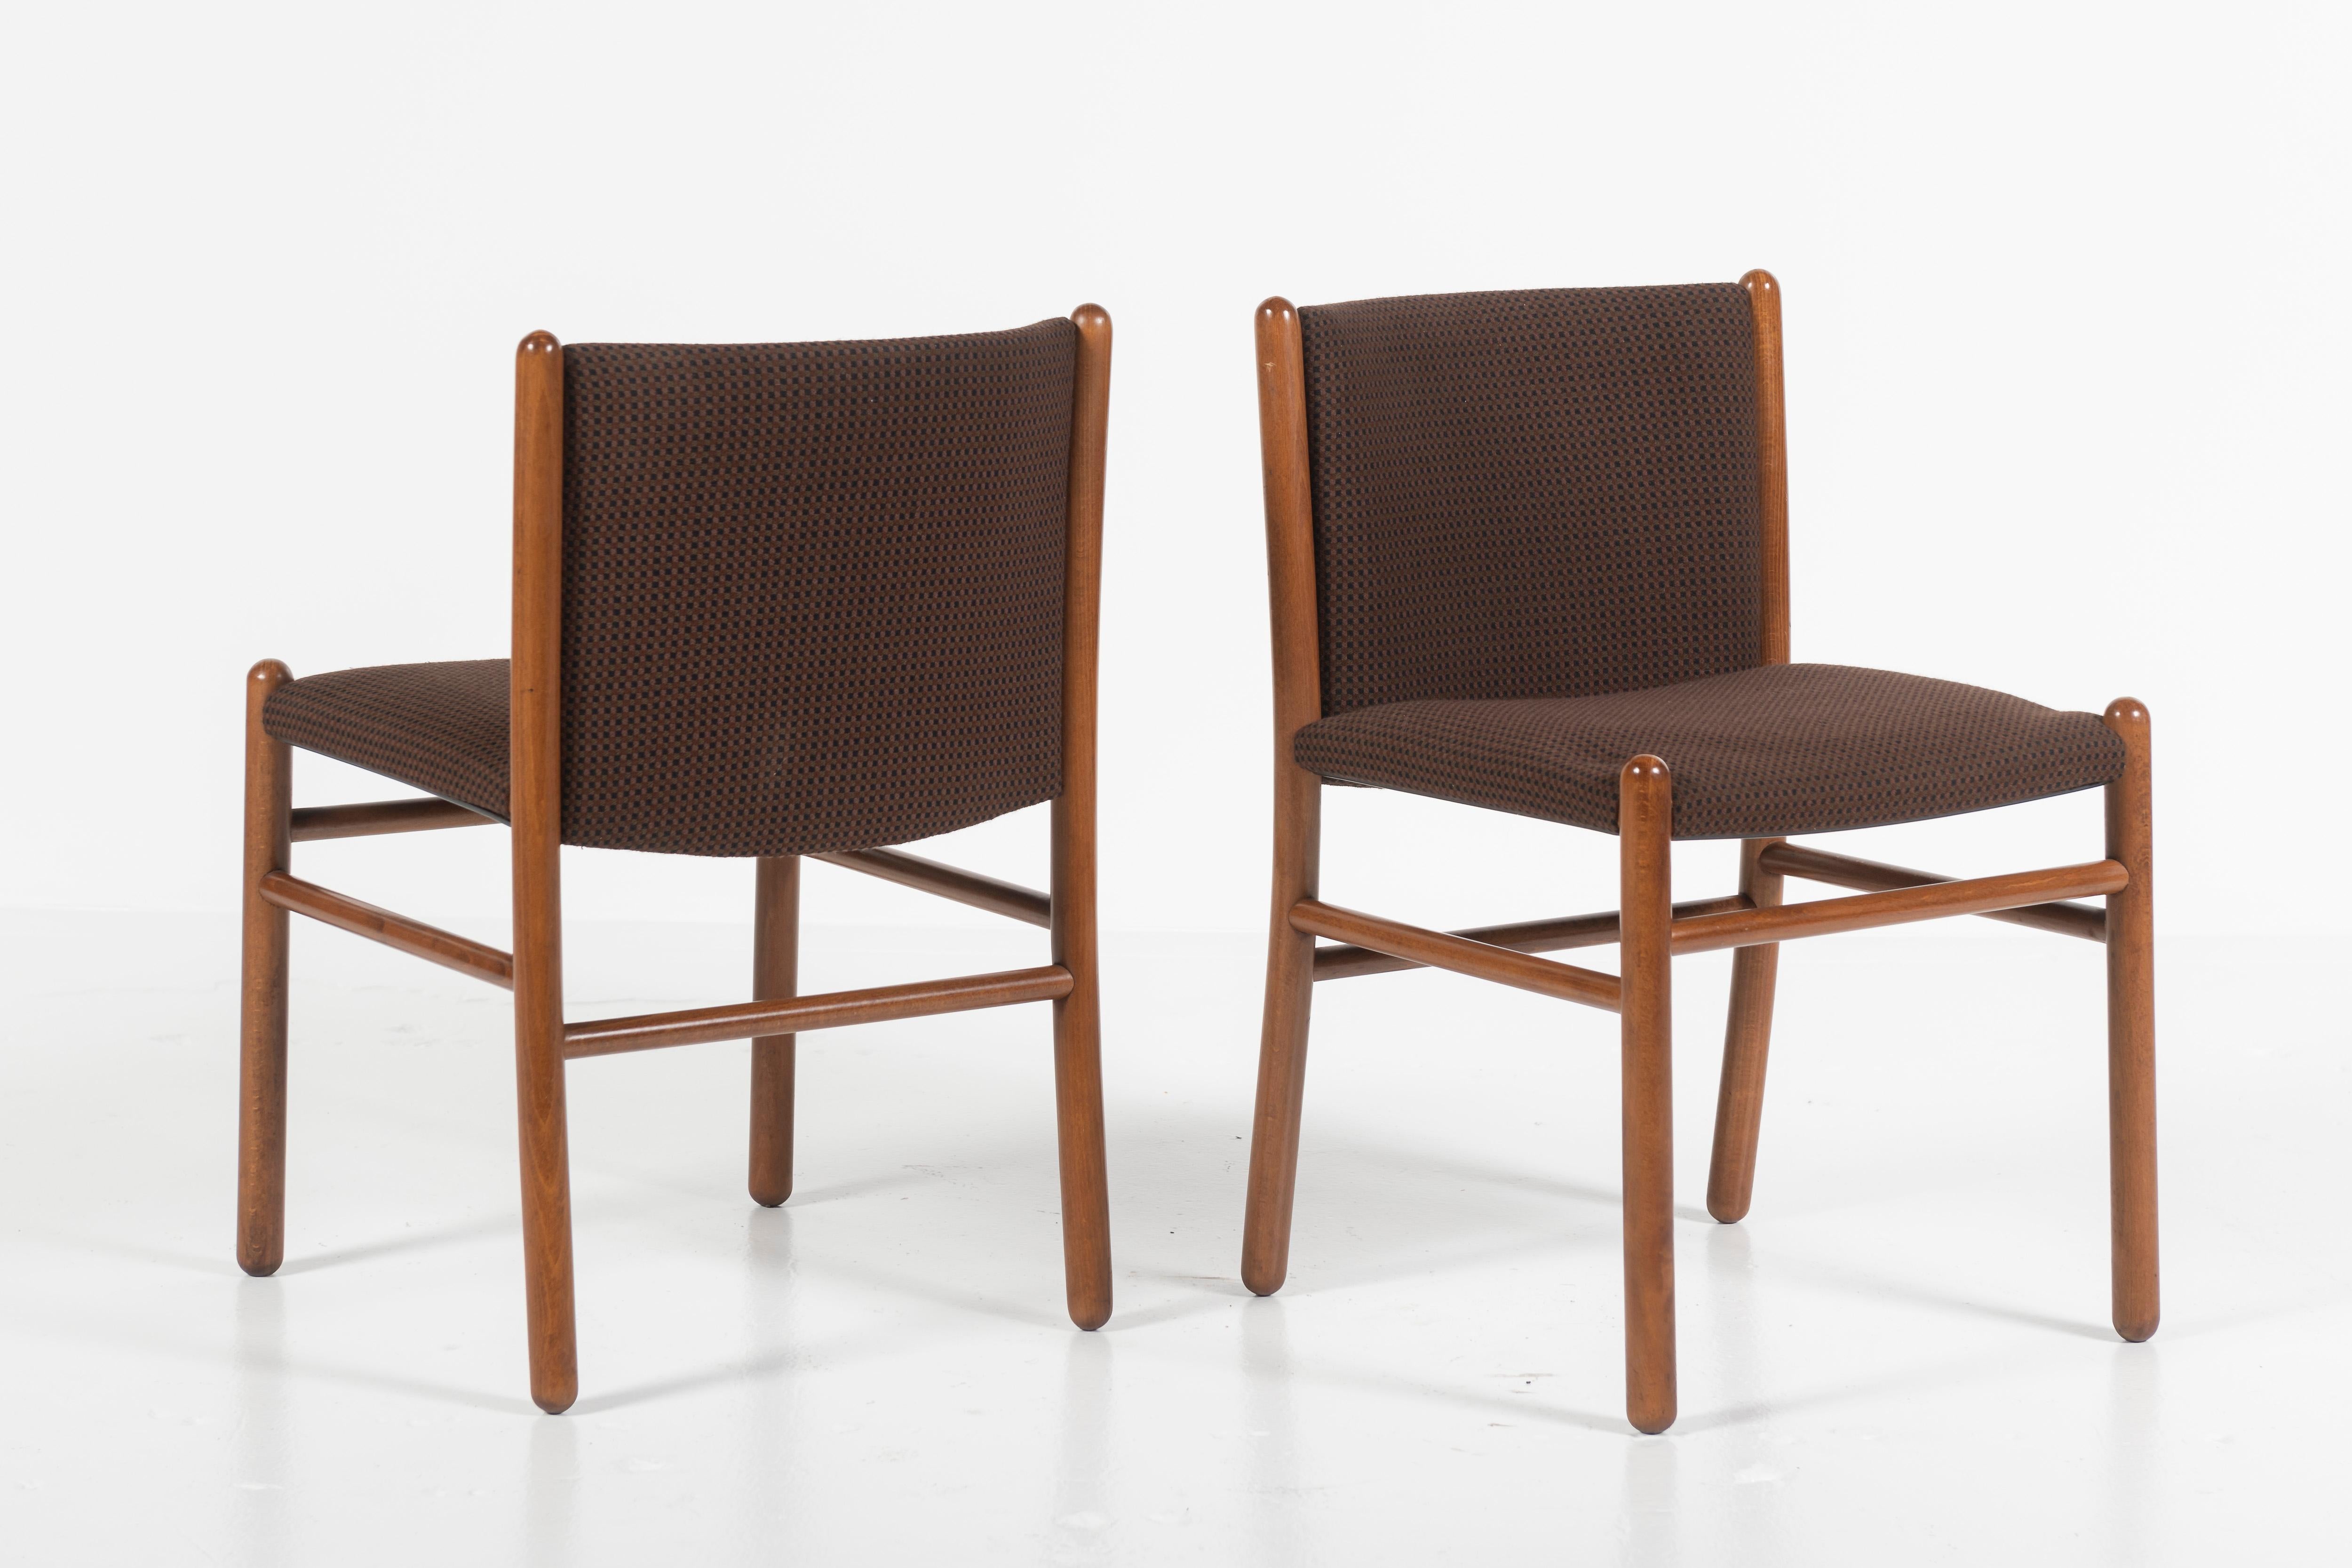 20th Century Set of Four Mid-Century Modern Dining Chairs, Gianfranco Frattini, Italy, 1960s For Sale